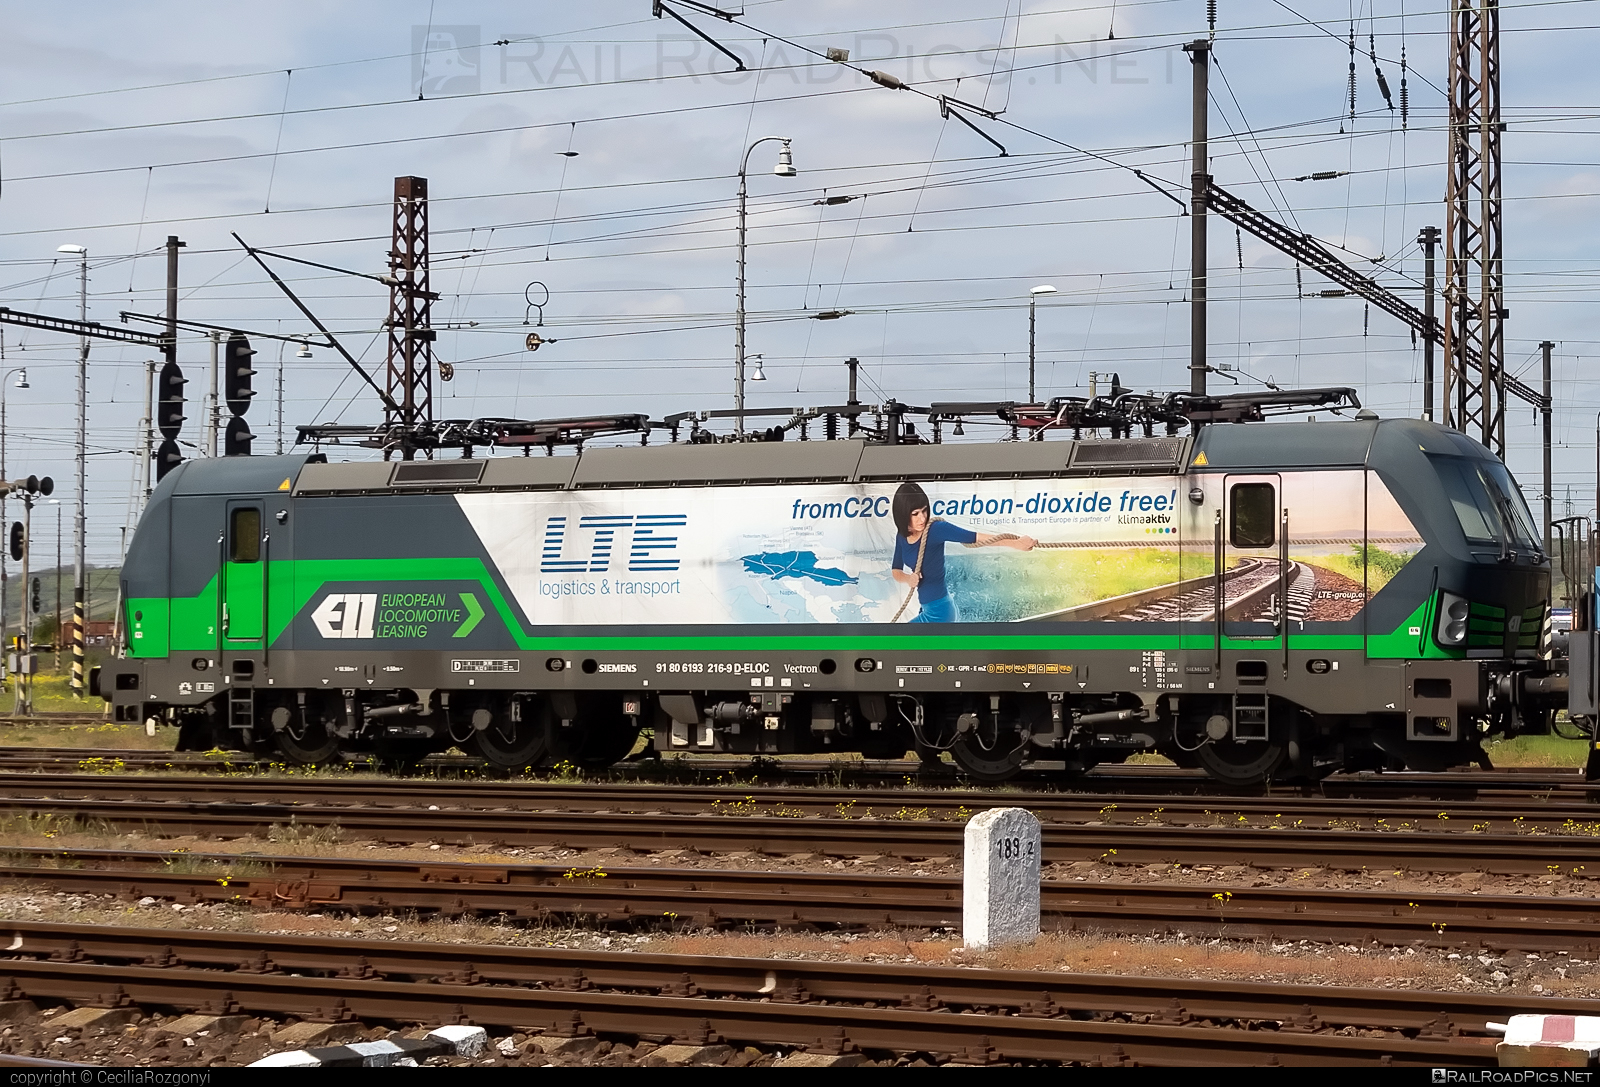 Siemens Vectron MS - 193 216 operated by LTE Logistik und Transport GmbH #ell #ellgermany #eloc #europeanlocomotiveleasing #lte #ltelogistikundtransport #ltelogistikundtransportgmbh #siemens #siemensVectron #siemensVectronMS #vectron #vectronMS